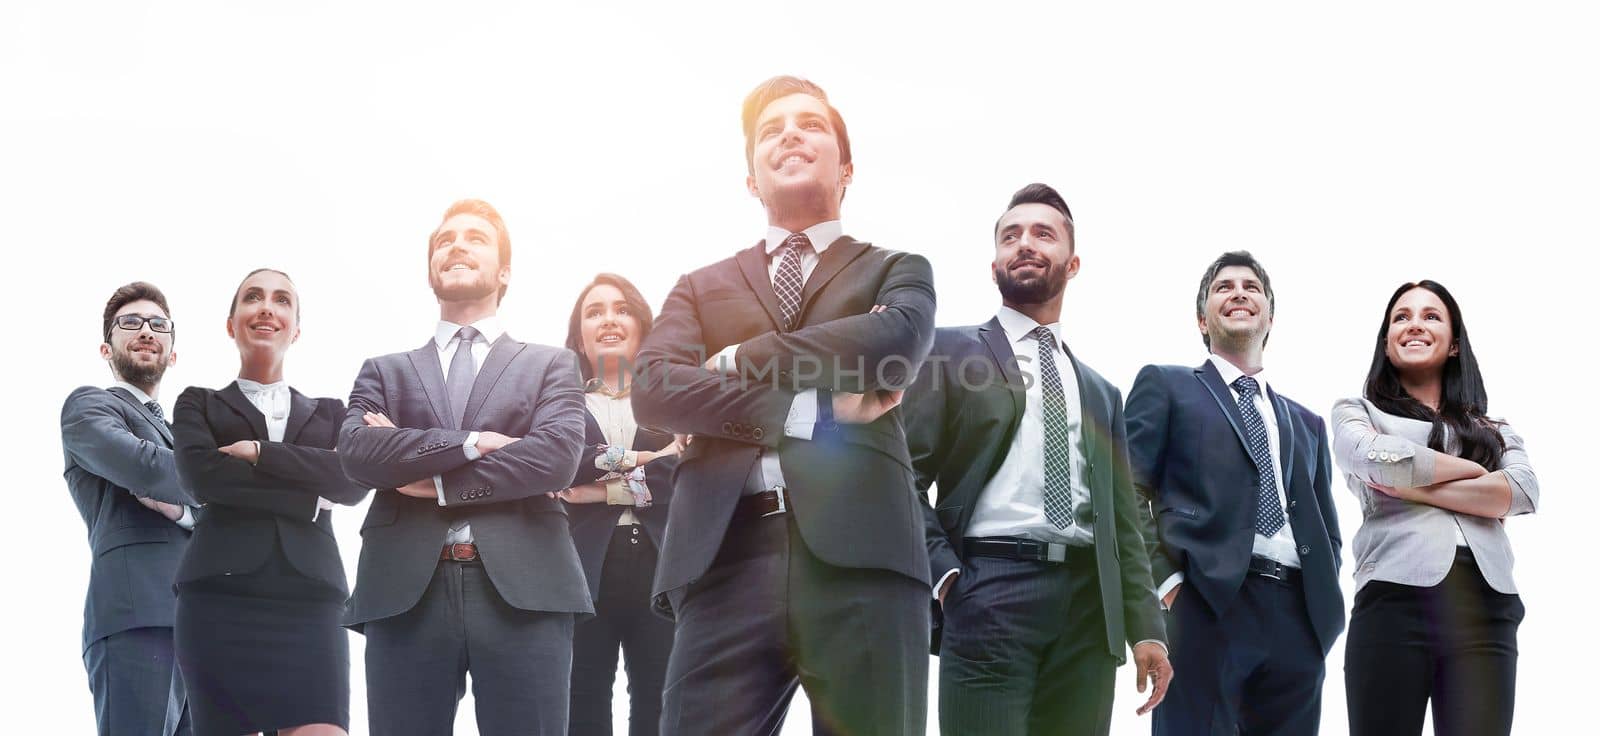 Portrait of friendly business team standing in isolation